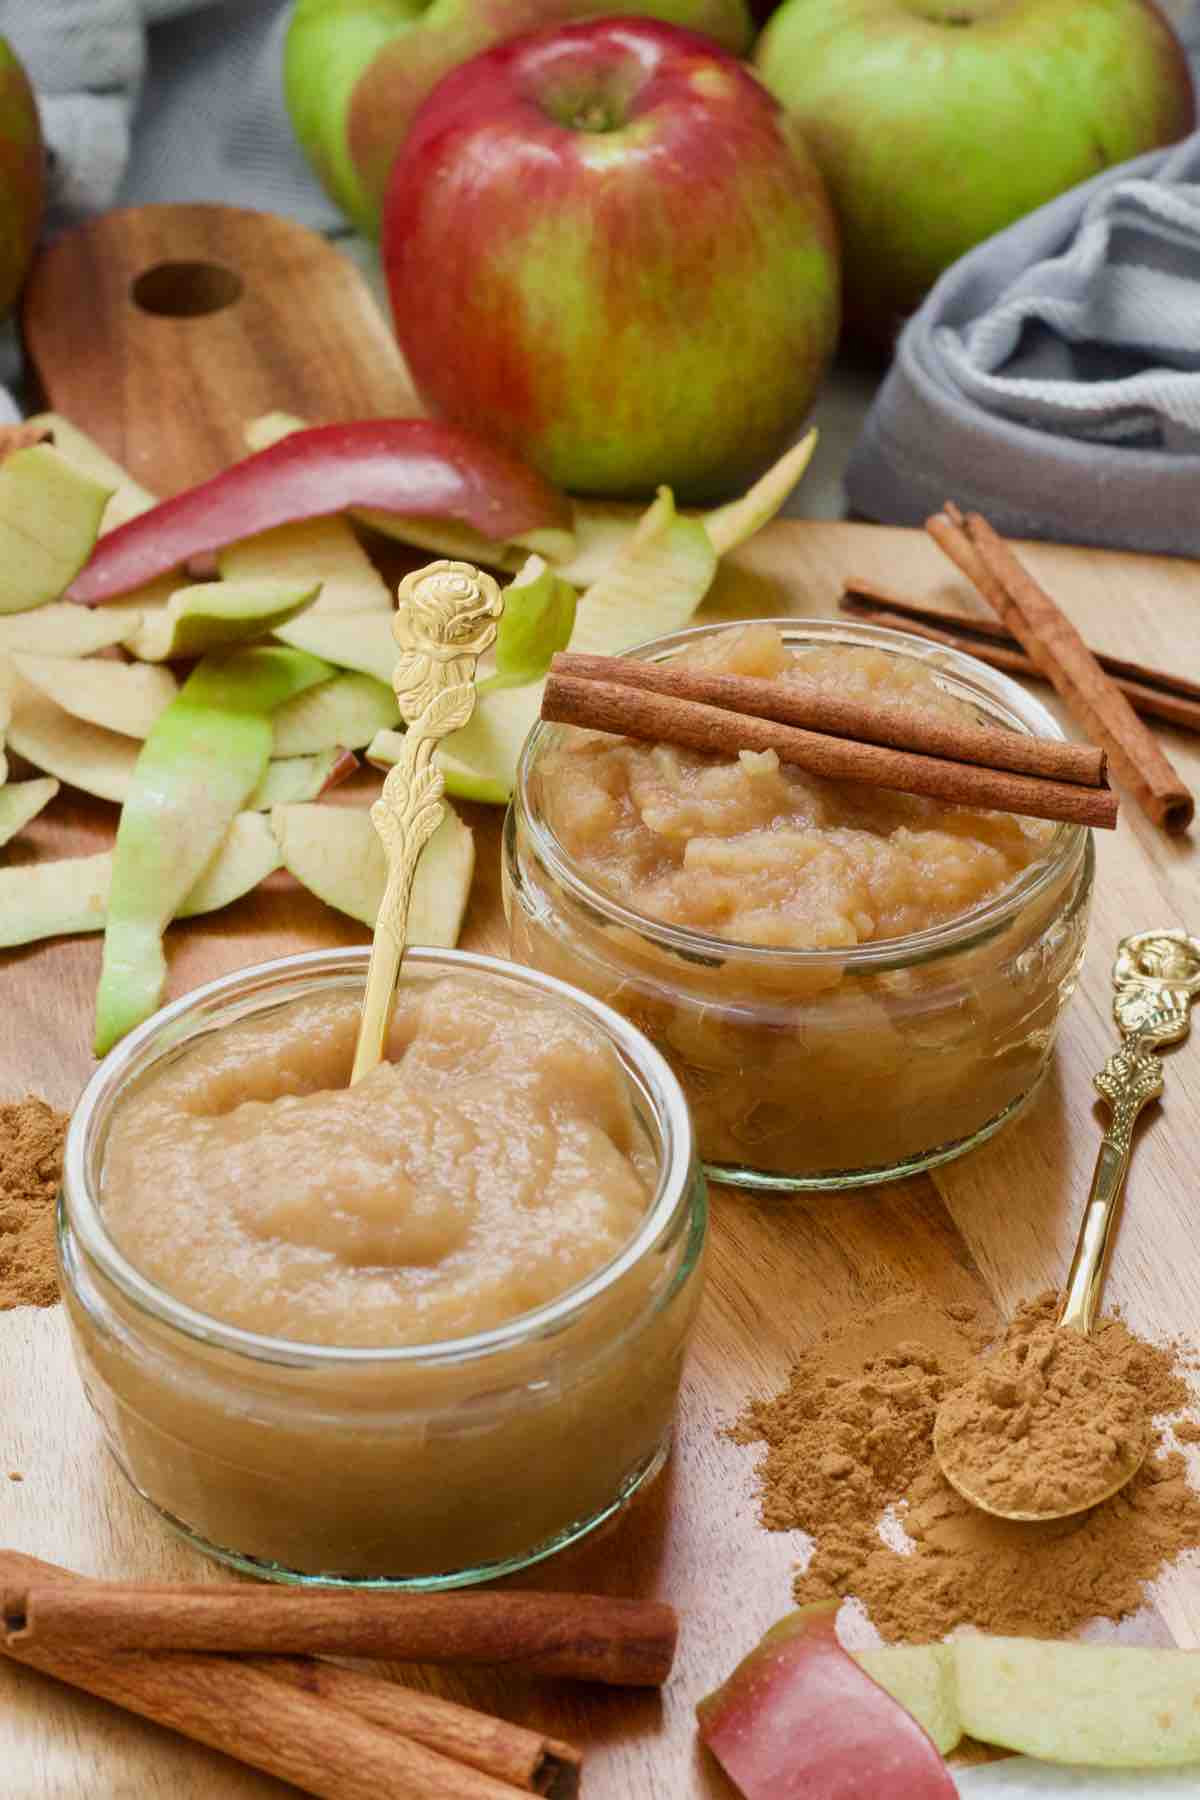 Two bowls with apple puree - smooth and chunky, apple peels and cinnamon.